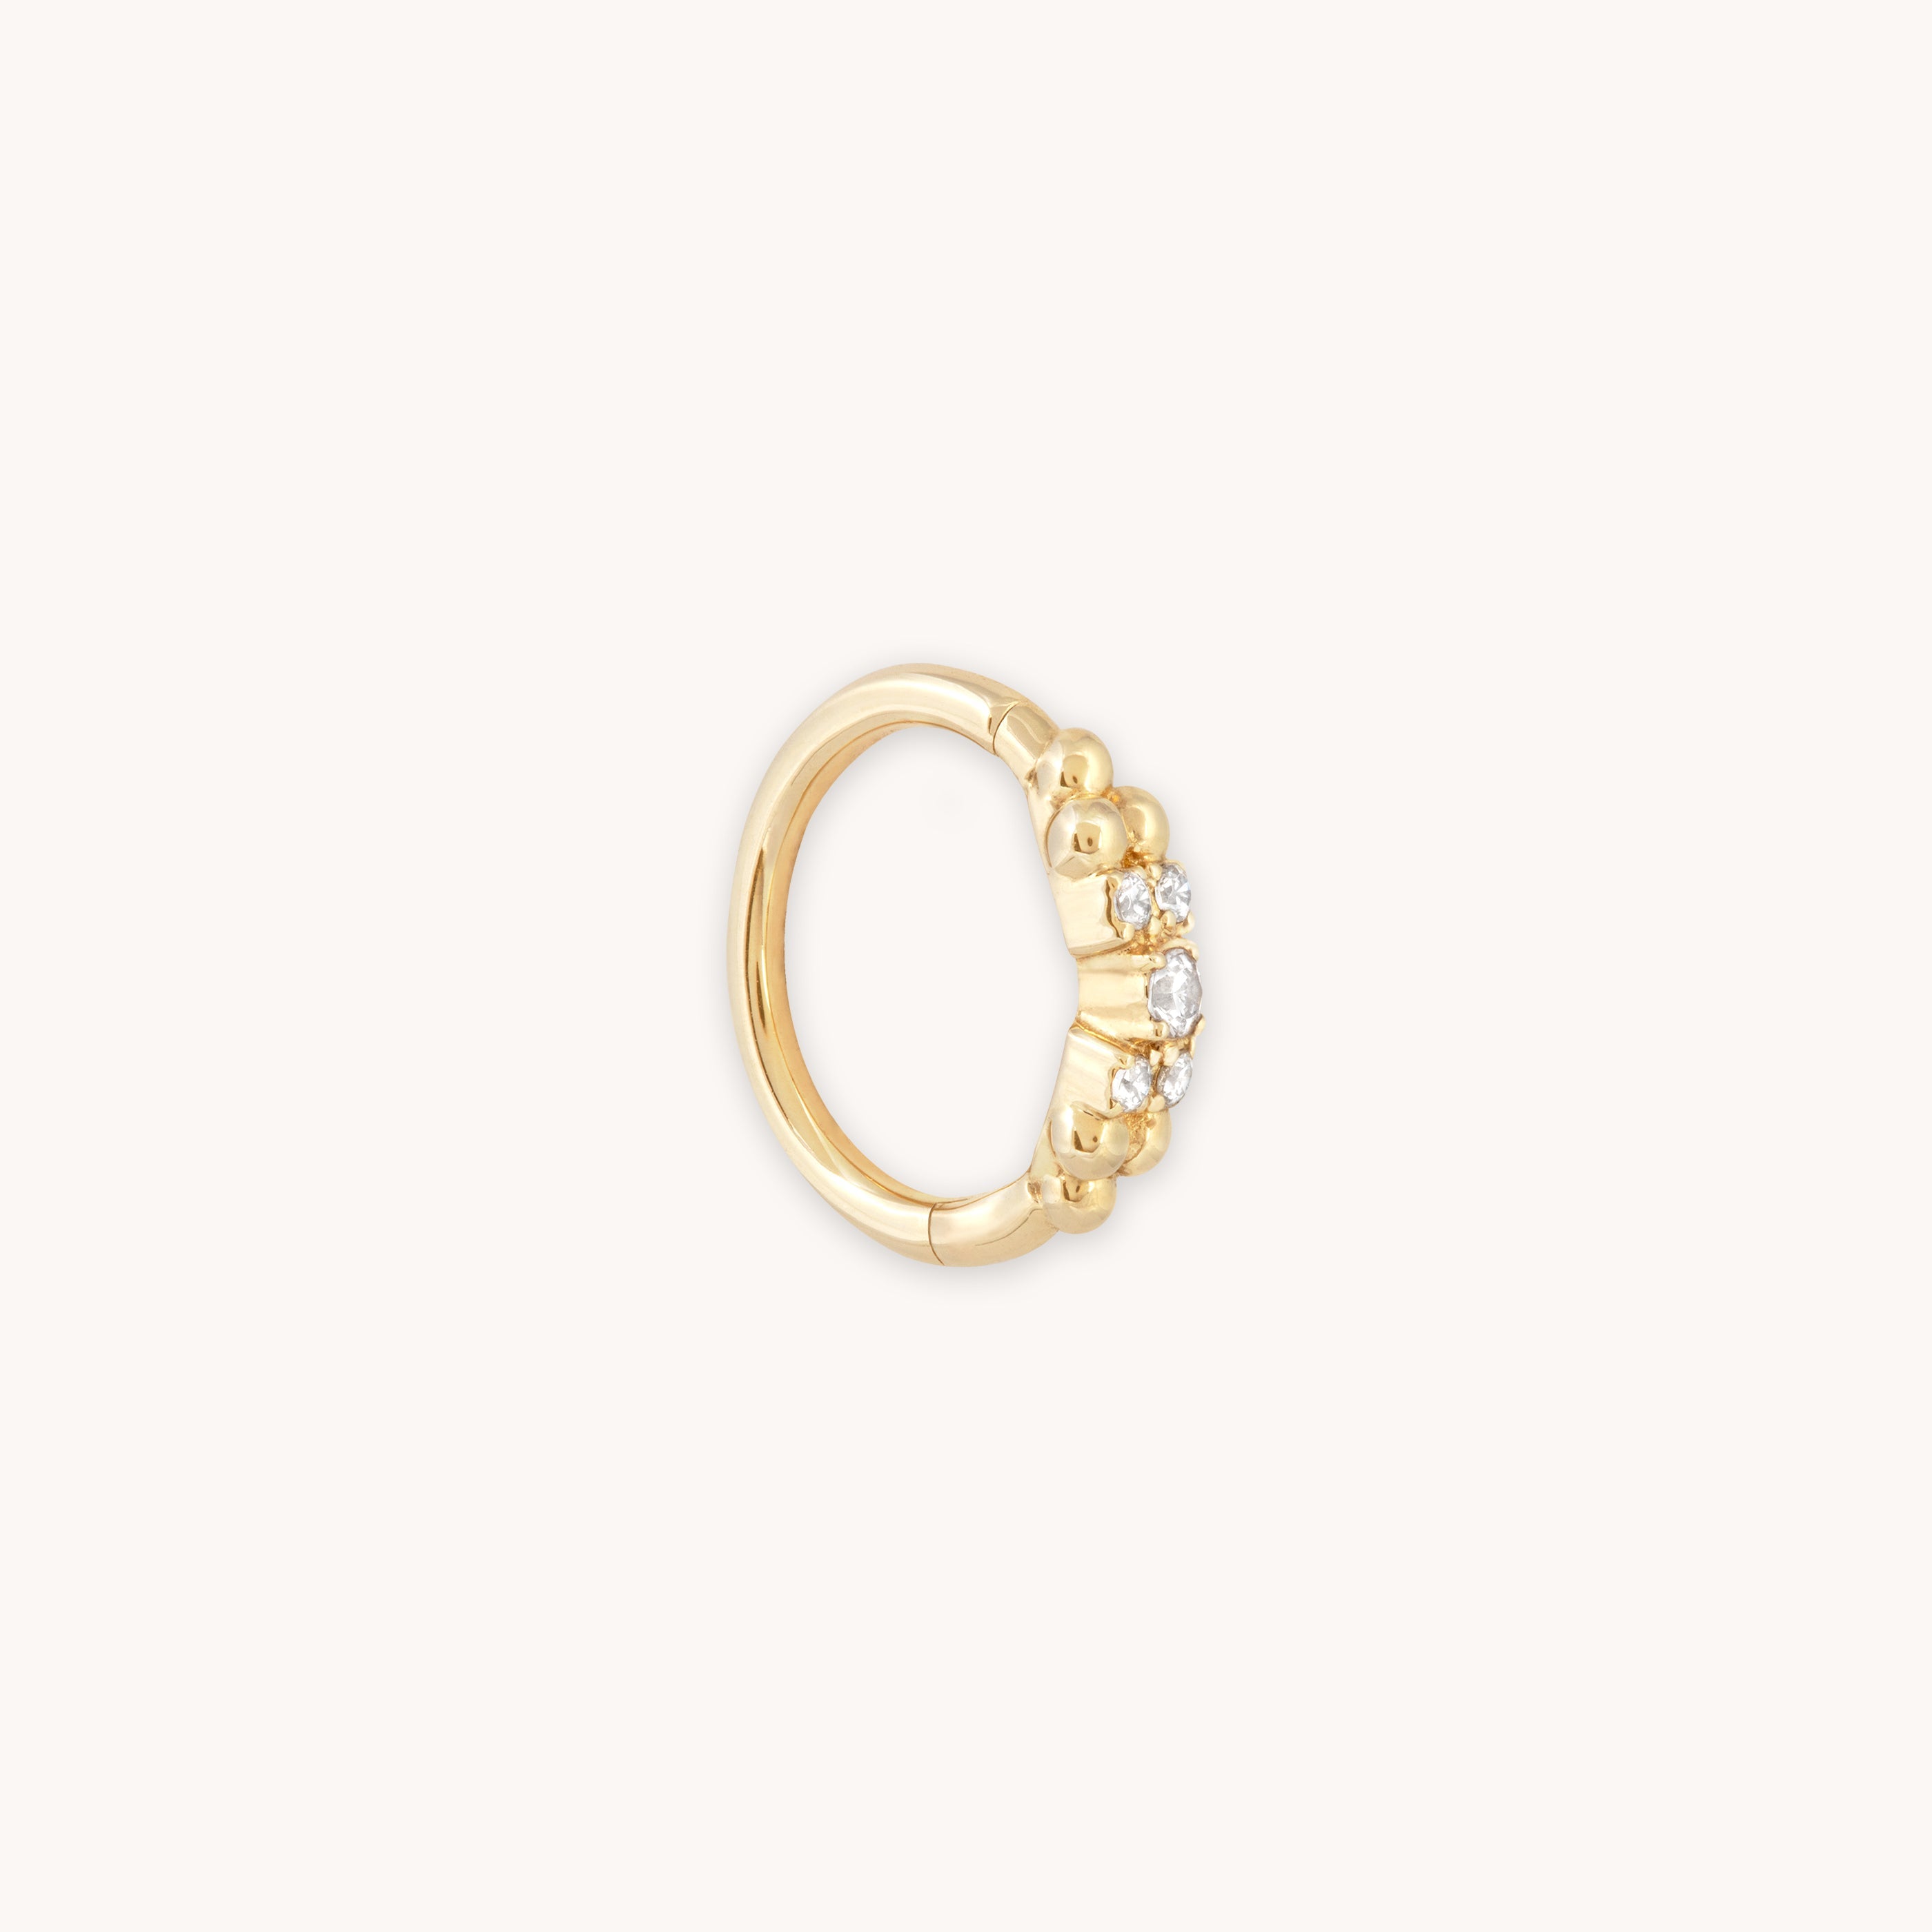 SOLID GOLD BEADED CRYSTAL PIERCING HOOP CUT OUT